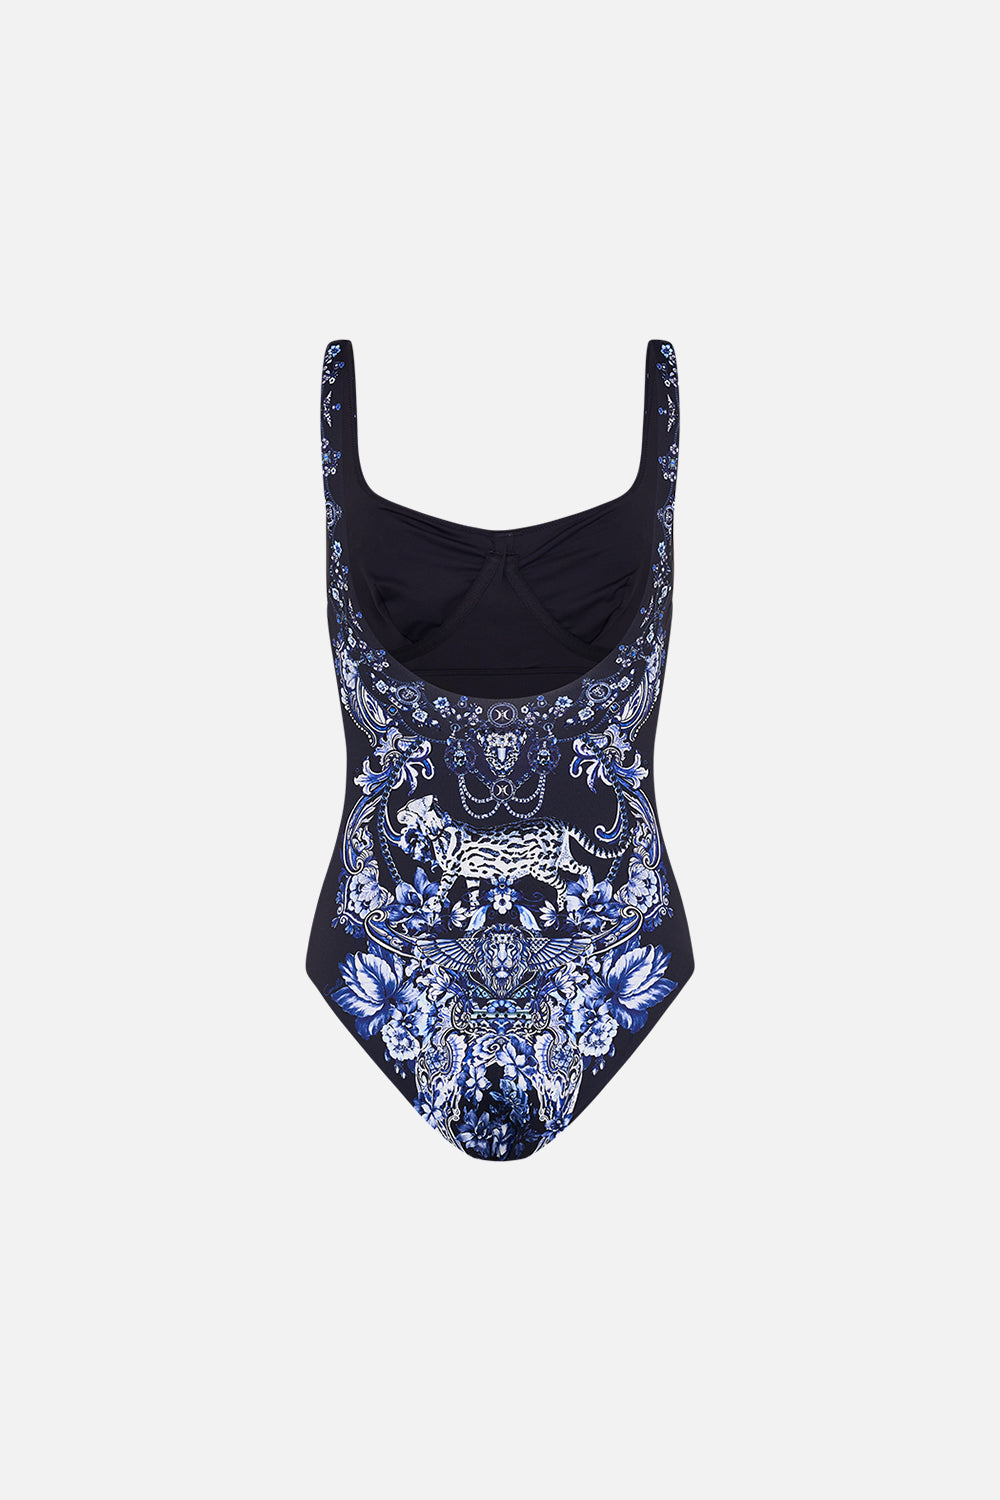 Back view of CAMILLA womens one piece swimsuit in Delft Dynasty print